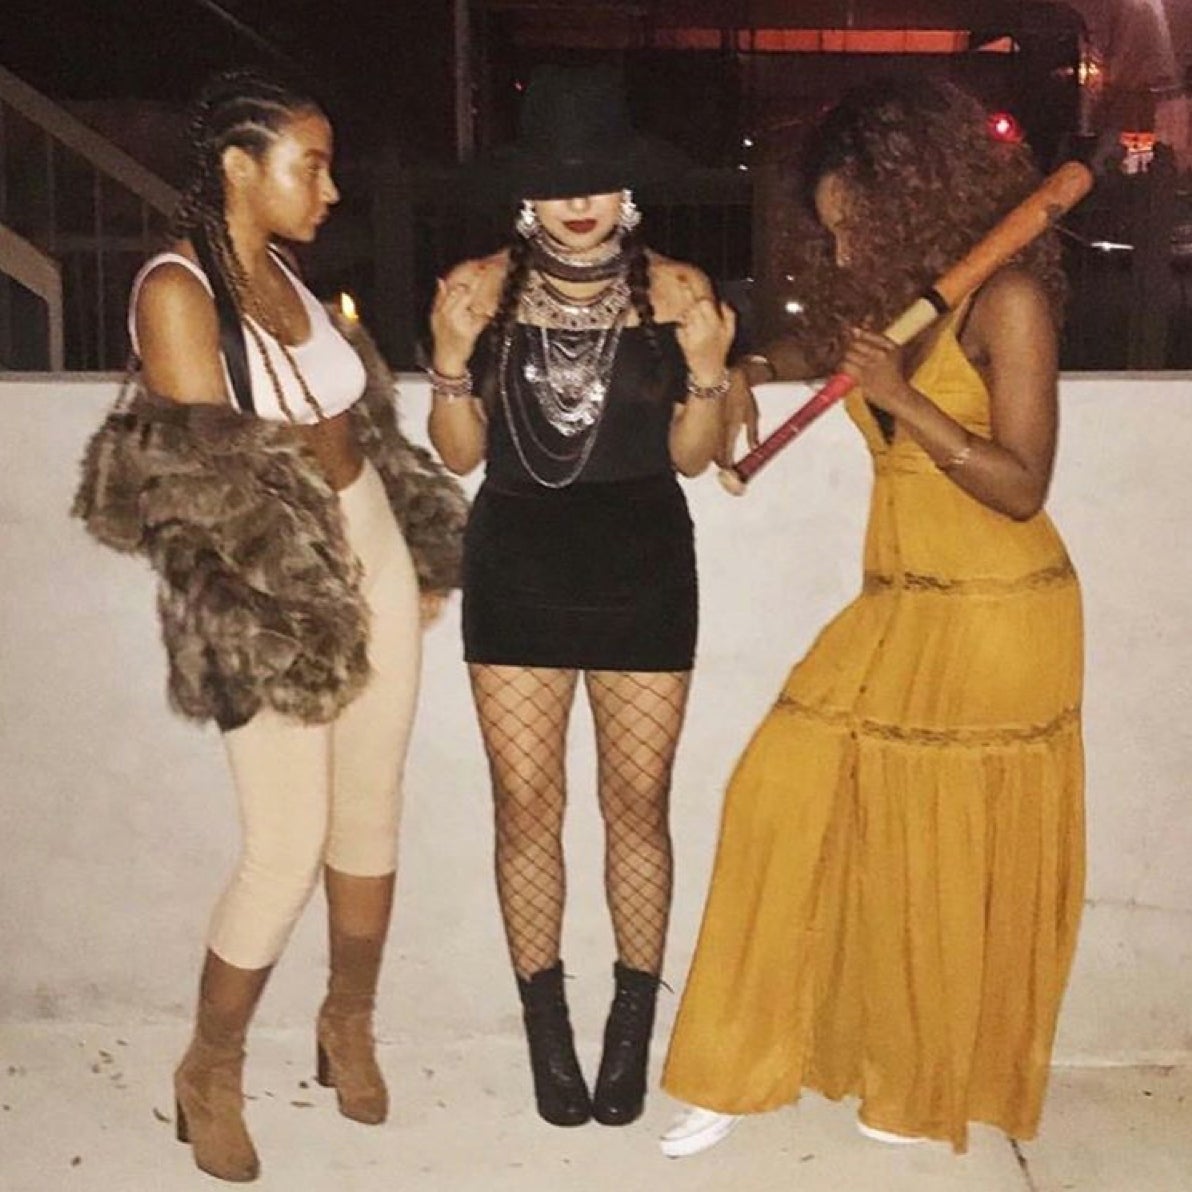 12 Costumes That Prove This Halloween Was All About Beyonce's Lemonade
